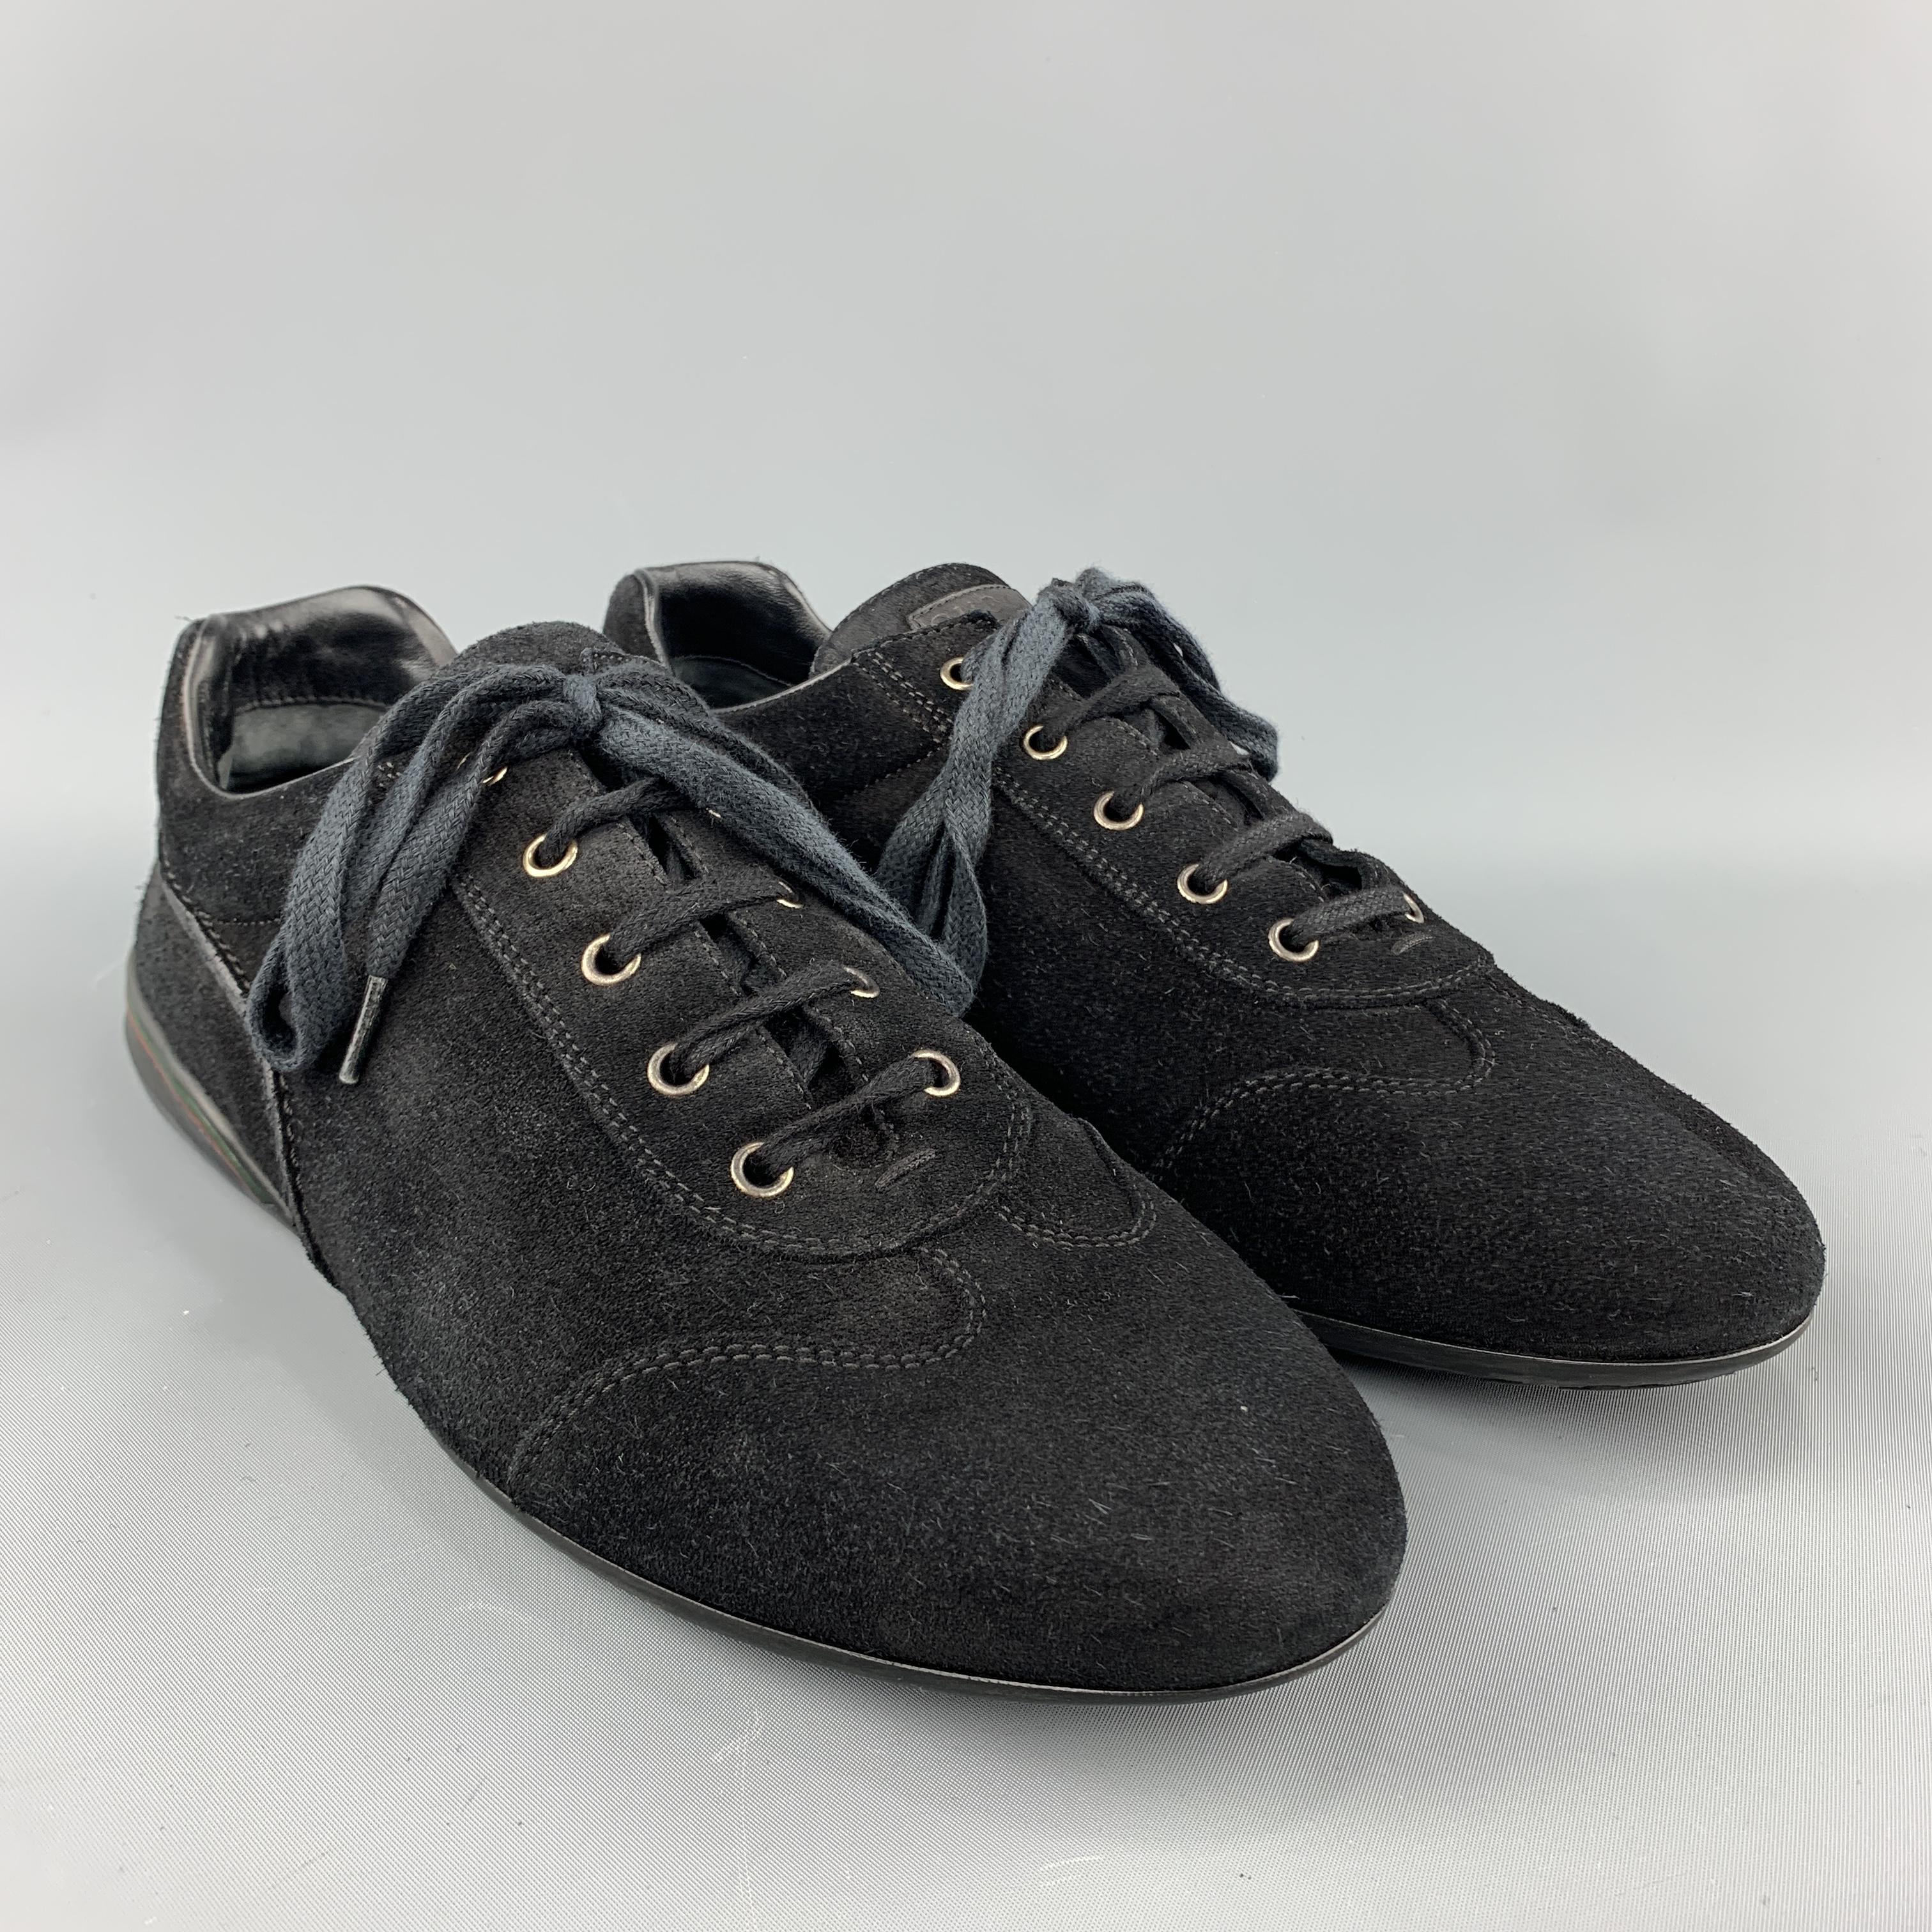 GUCCI trainers come in black suede with a toe panel, lace up front, and rubber sole with stripe accented heel. Made in Italy.
 
Very Good Pre-Owned Condition.
Marked: UK 9.5
 
Outsole:  12 x 4 in.